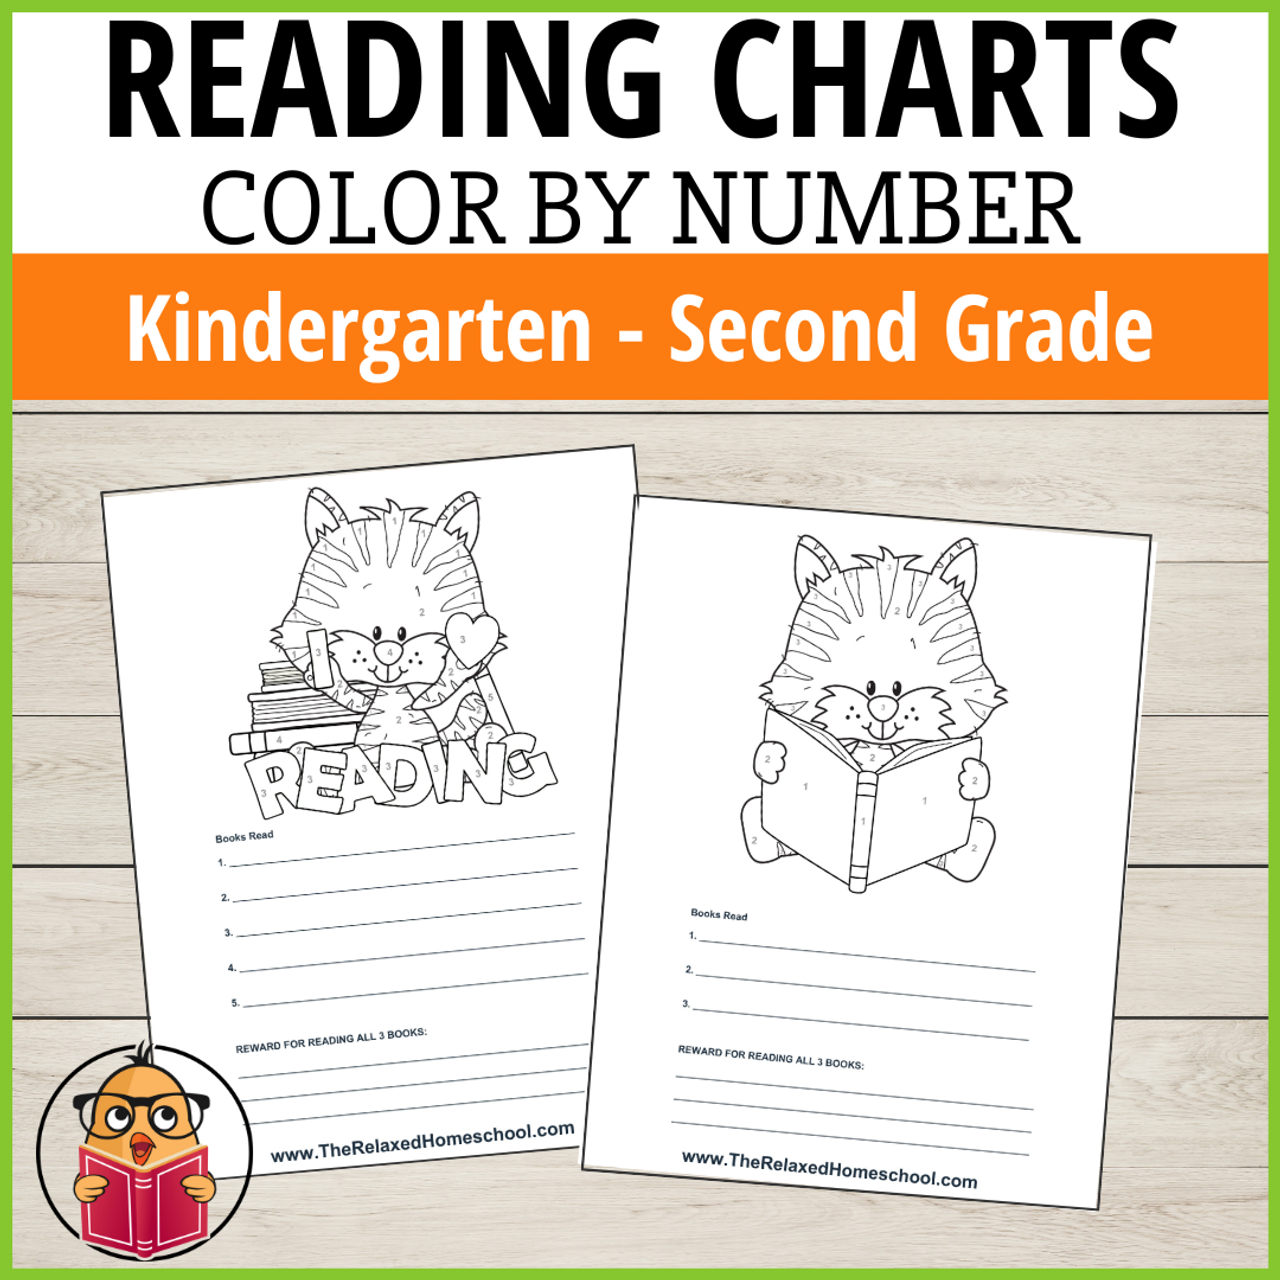 Reading Chart - Color By Number